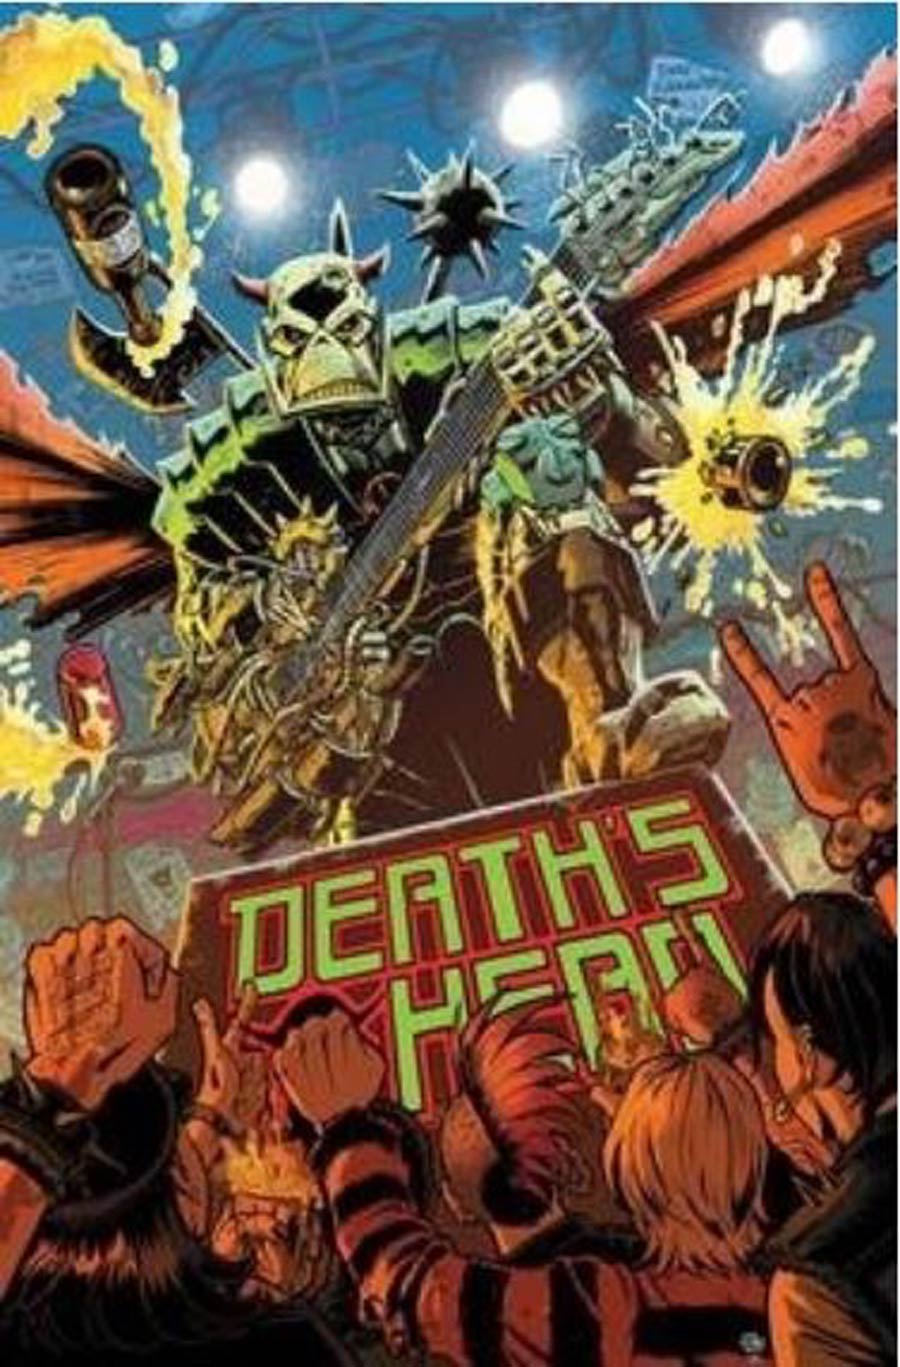 Deaths Head Vol 2 #1 By Nick Roche Poster